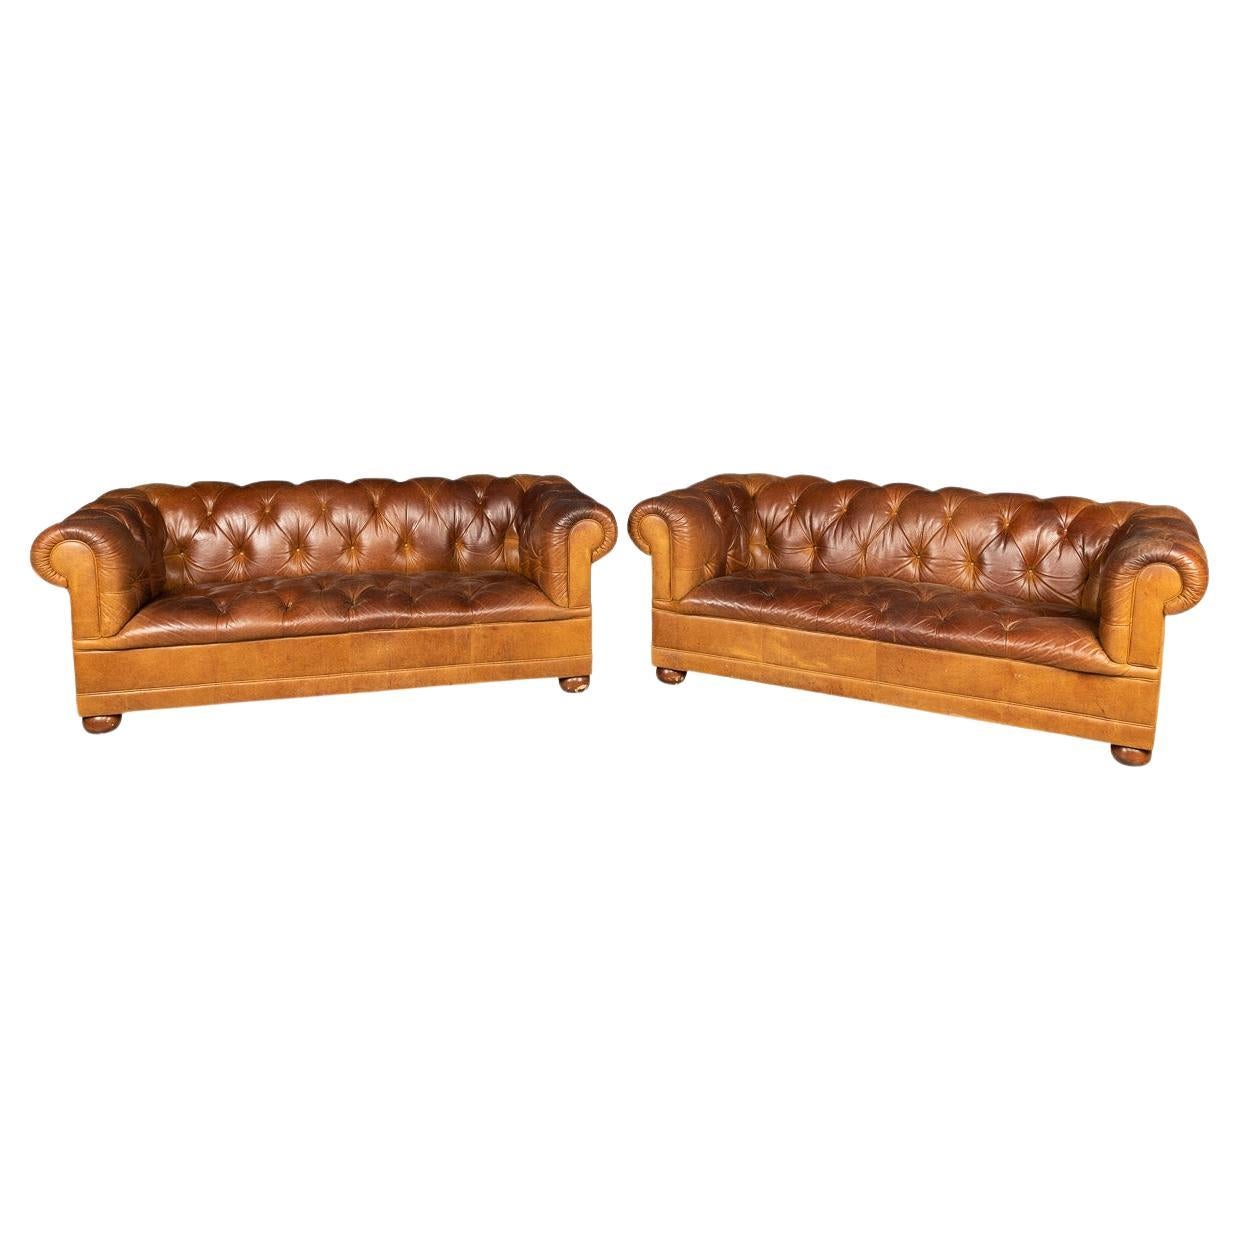 Pair of 20th Century Chesterfield Leather Sofas By Laura Ashley, c.1970